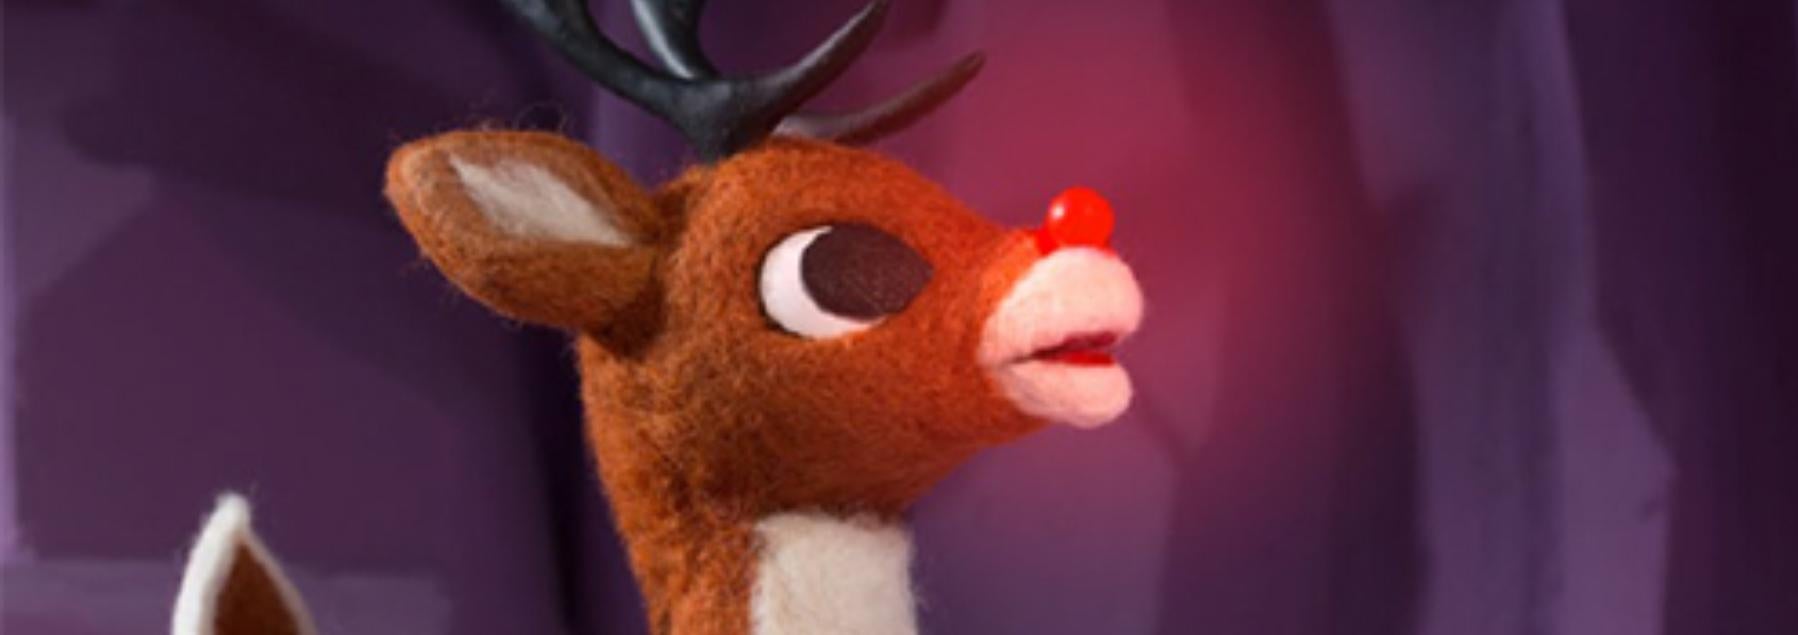 Rudolph the Red Nosed Reindeer with glowing nose stands against a purple background.